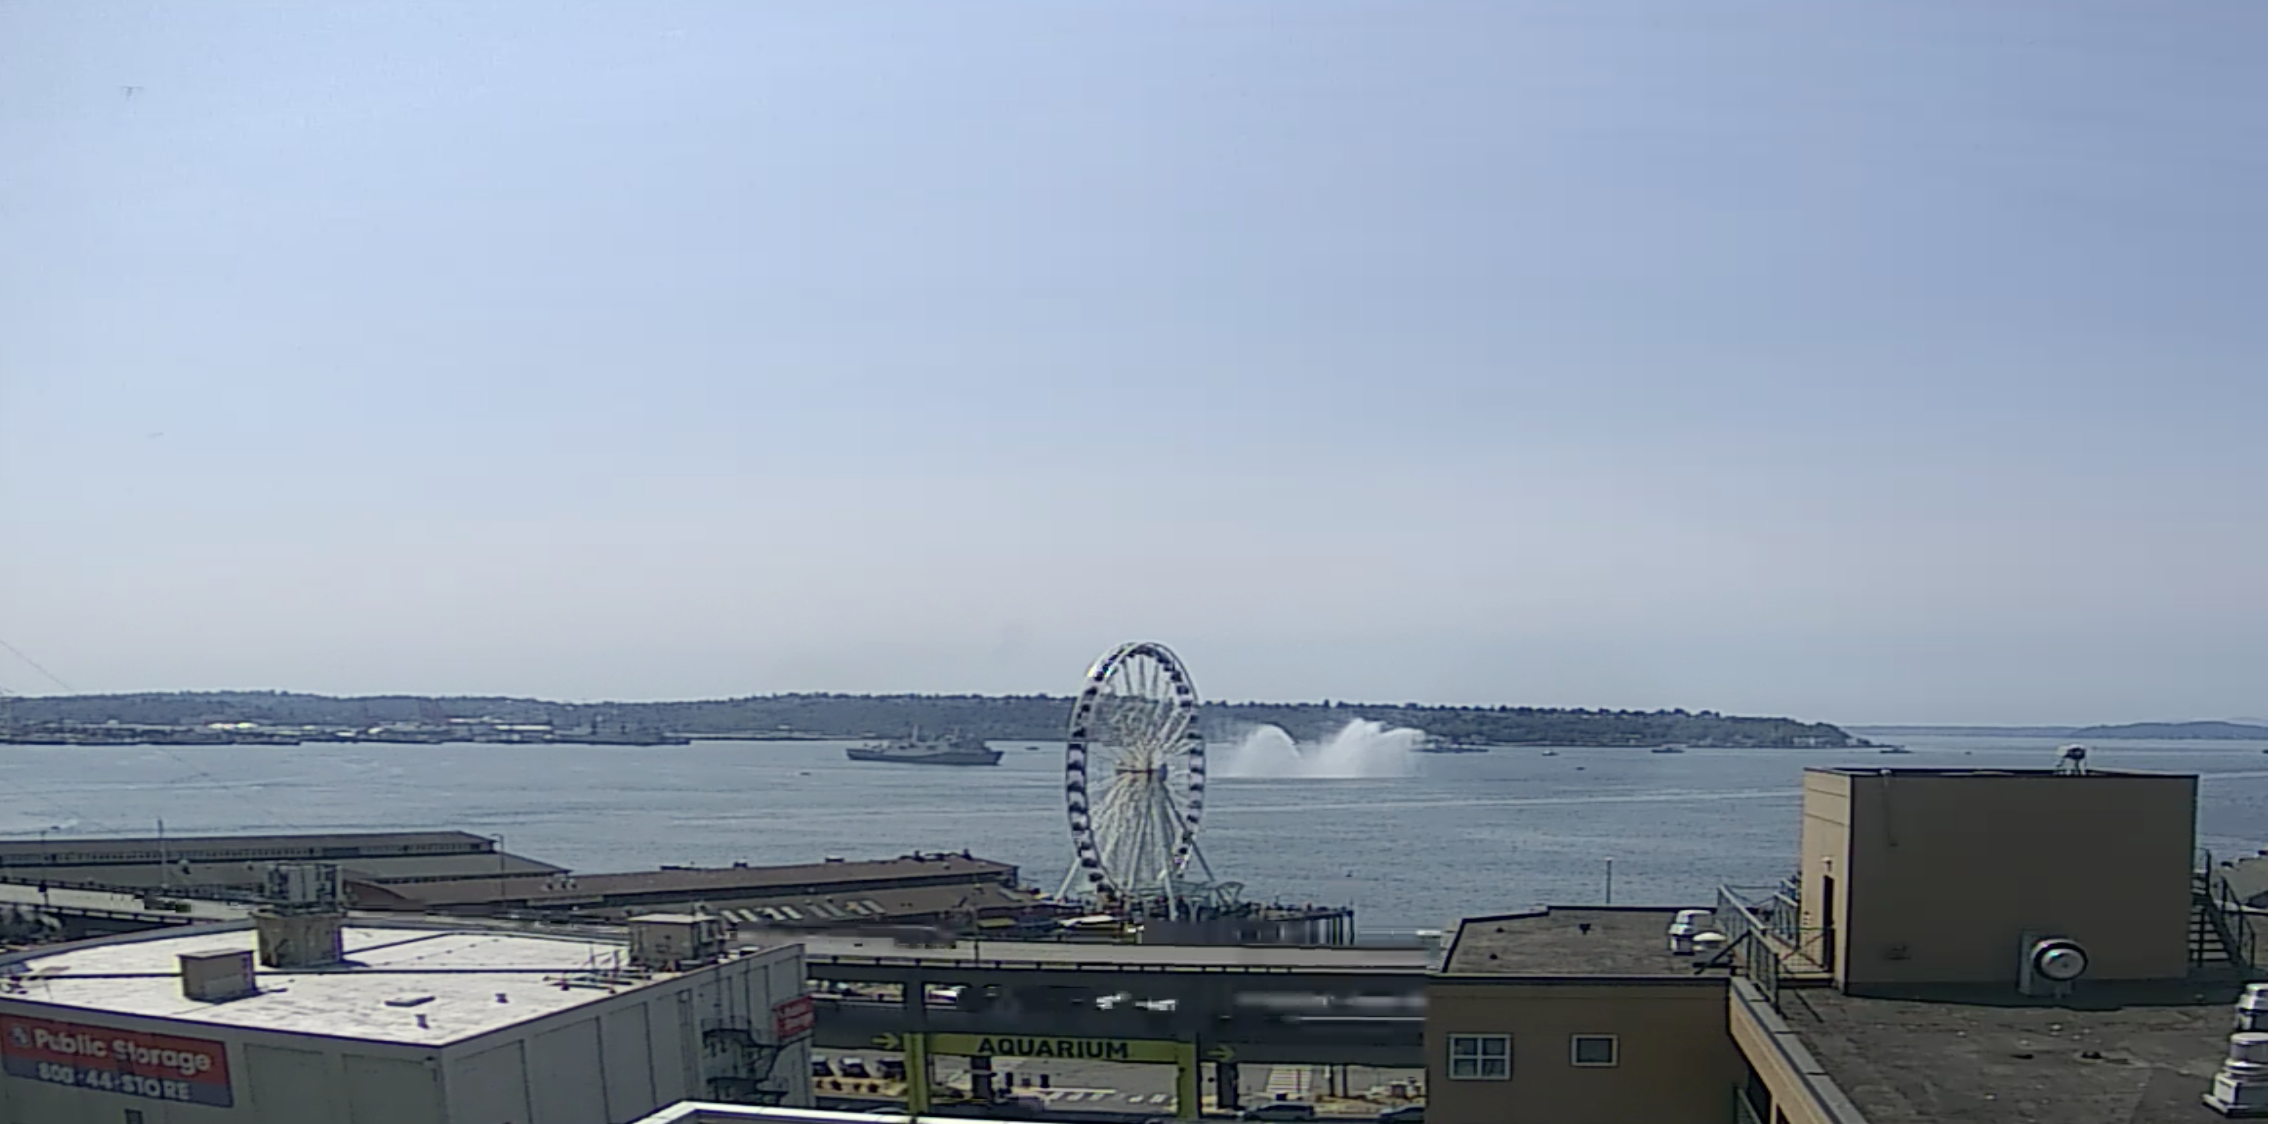 Seattle Waterfront Webcam U.S. Navy Boat and Fire Boat 07 31 2018